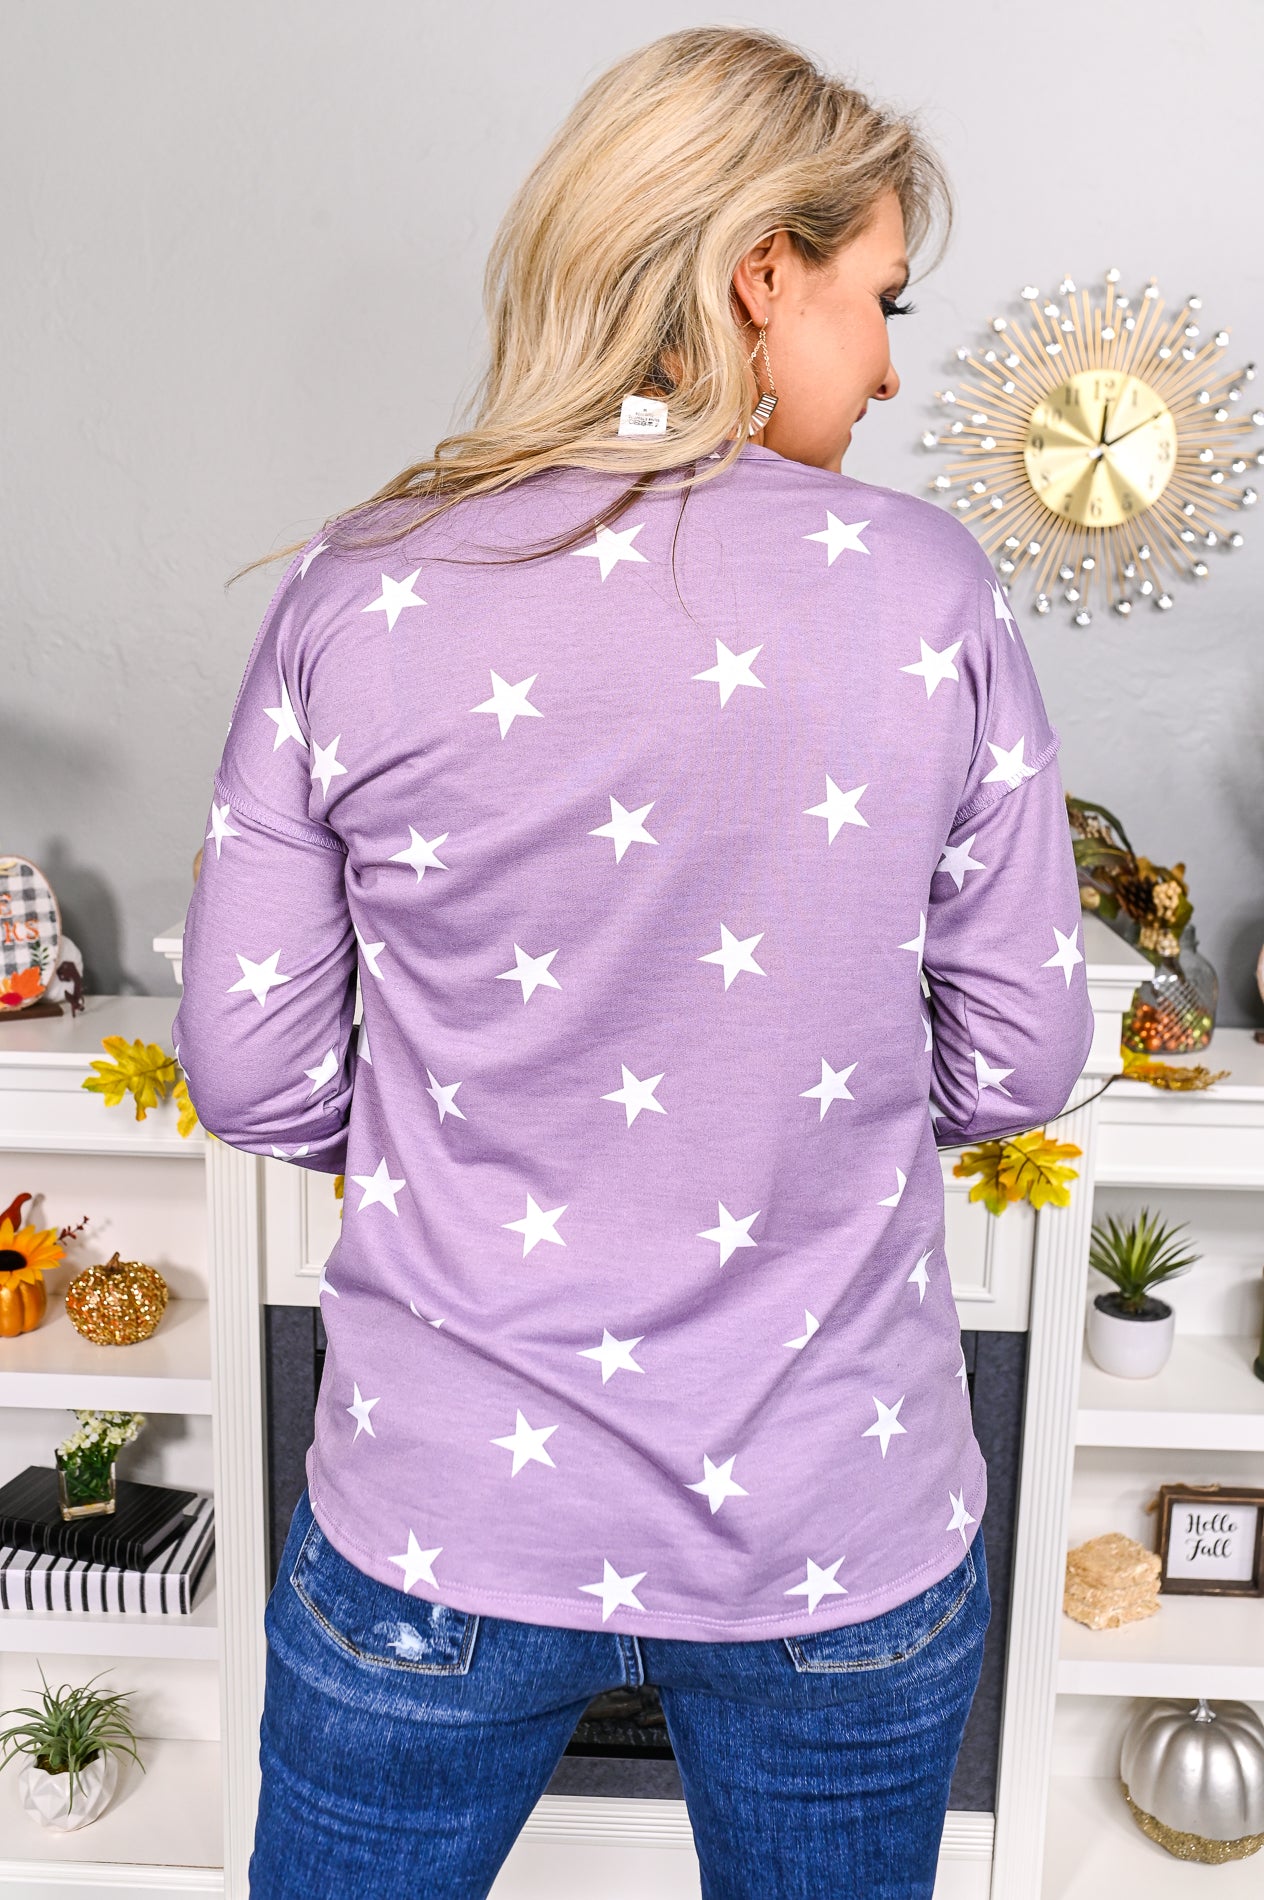 Shine Brighter Then The Stars Lavender/Ivory Star Printed Top - T5278LV